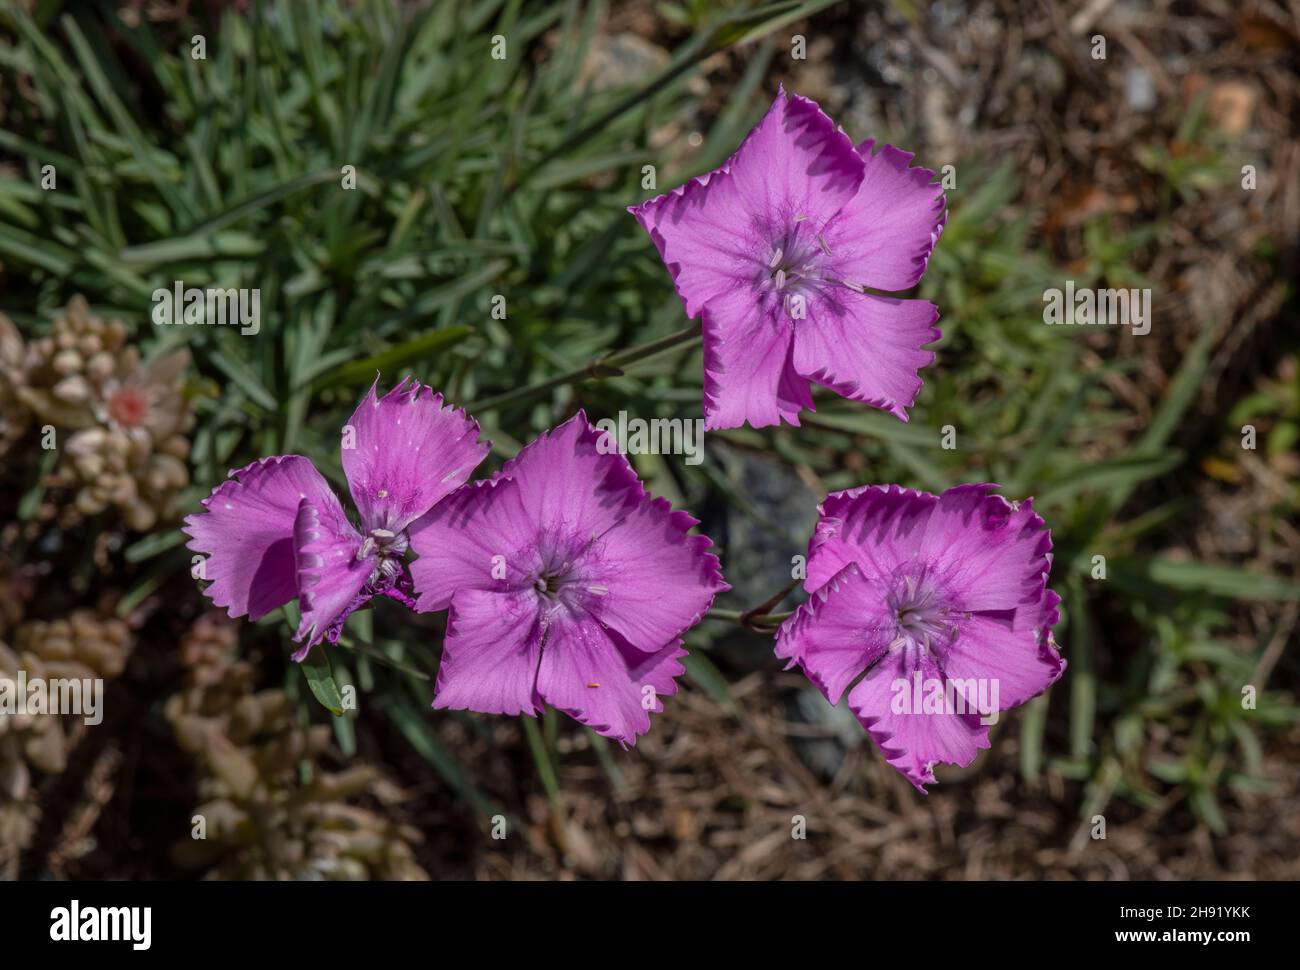 Cheddar pink, Dianthus gratianopolitanus, in flower, French Alps. Stock Photo